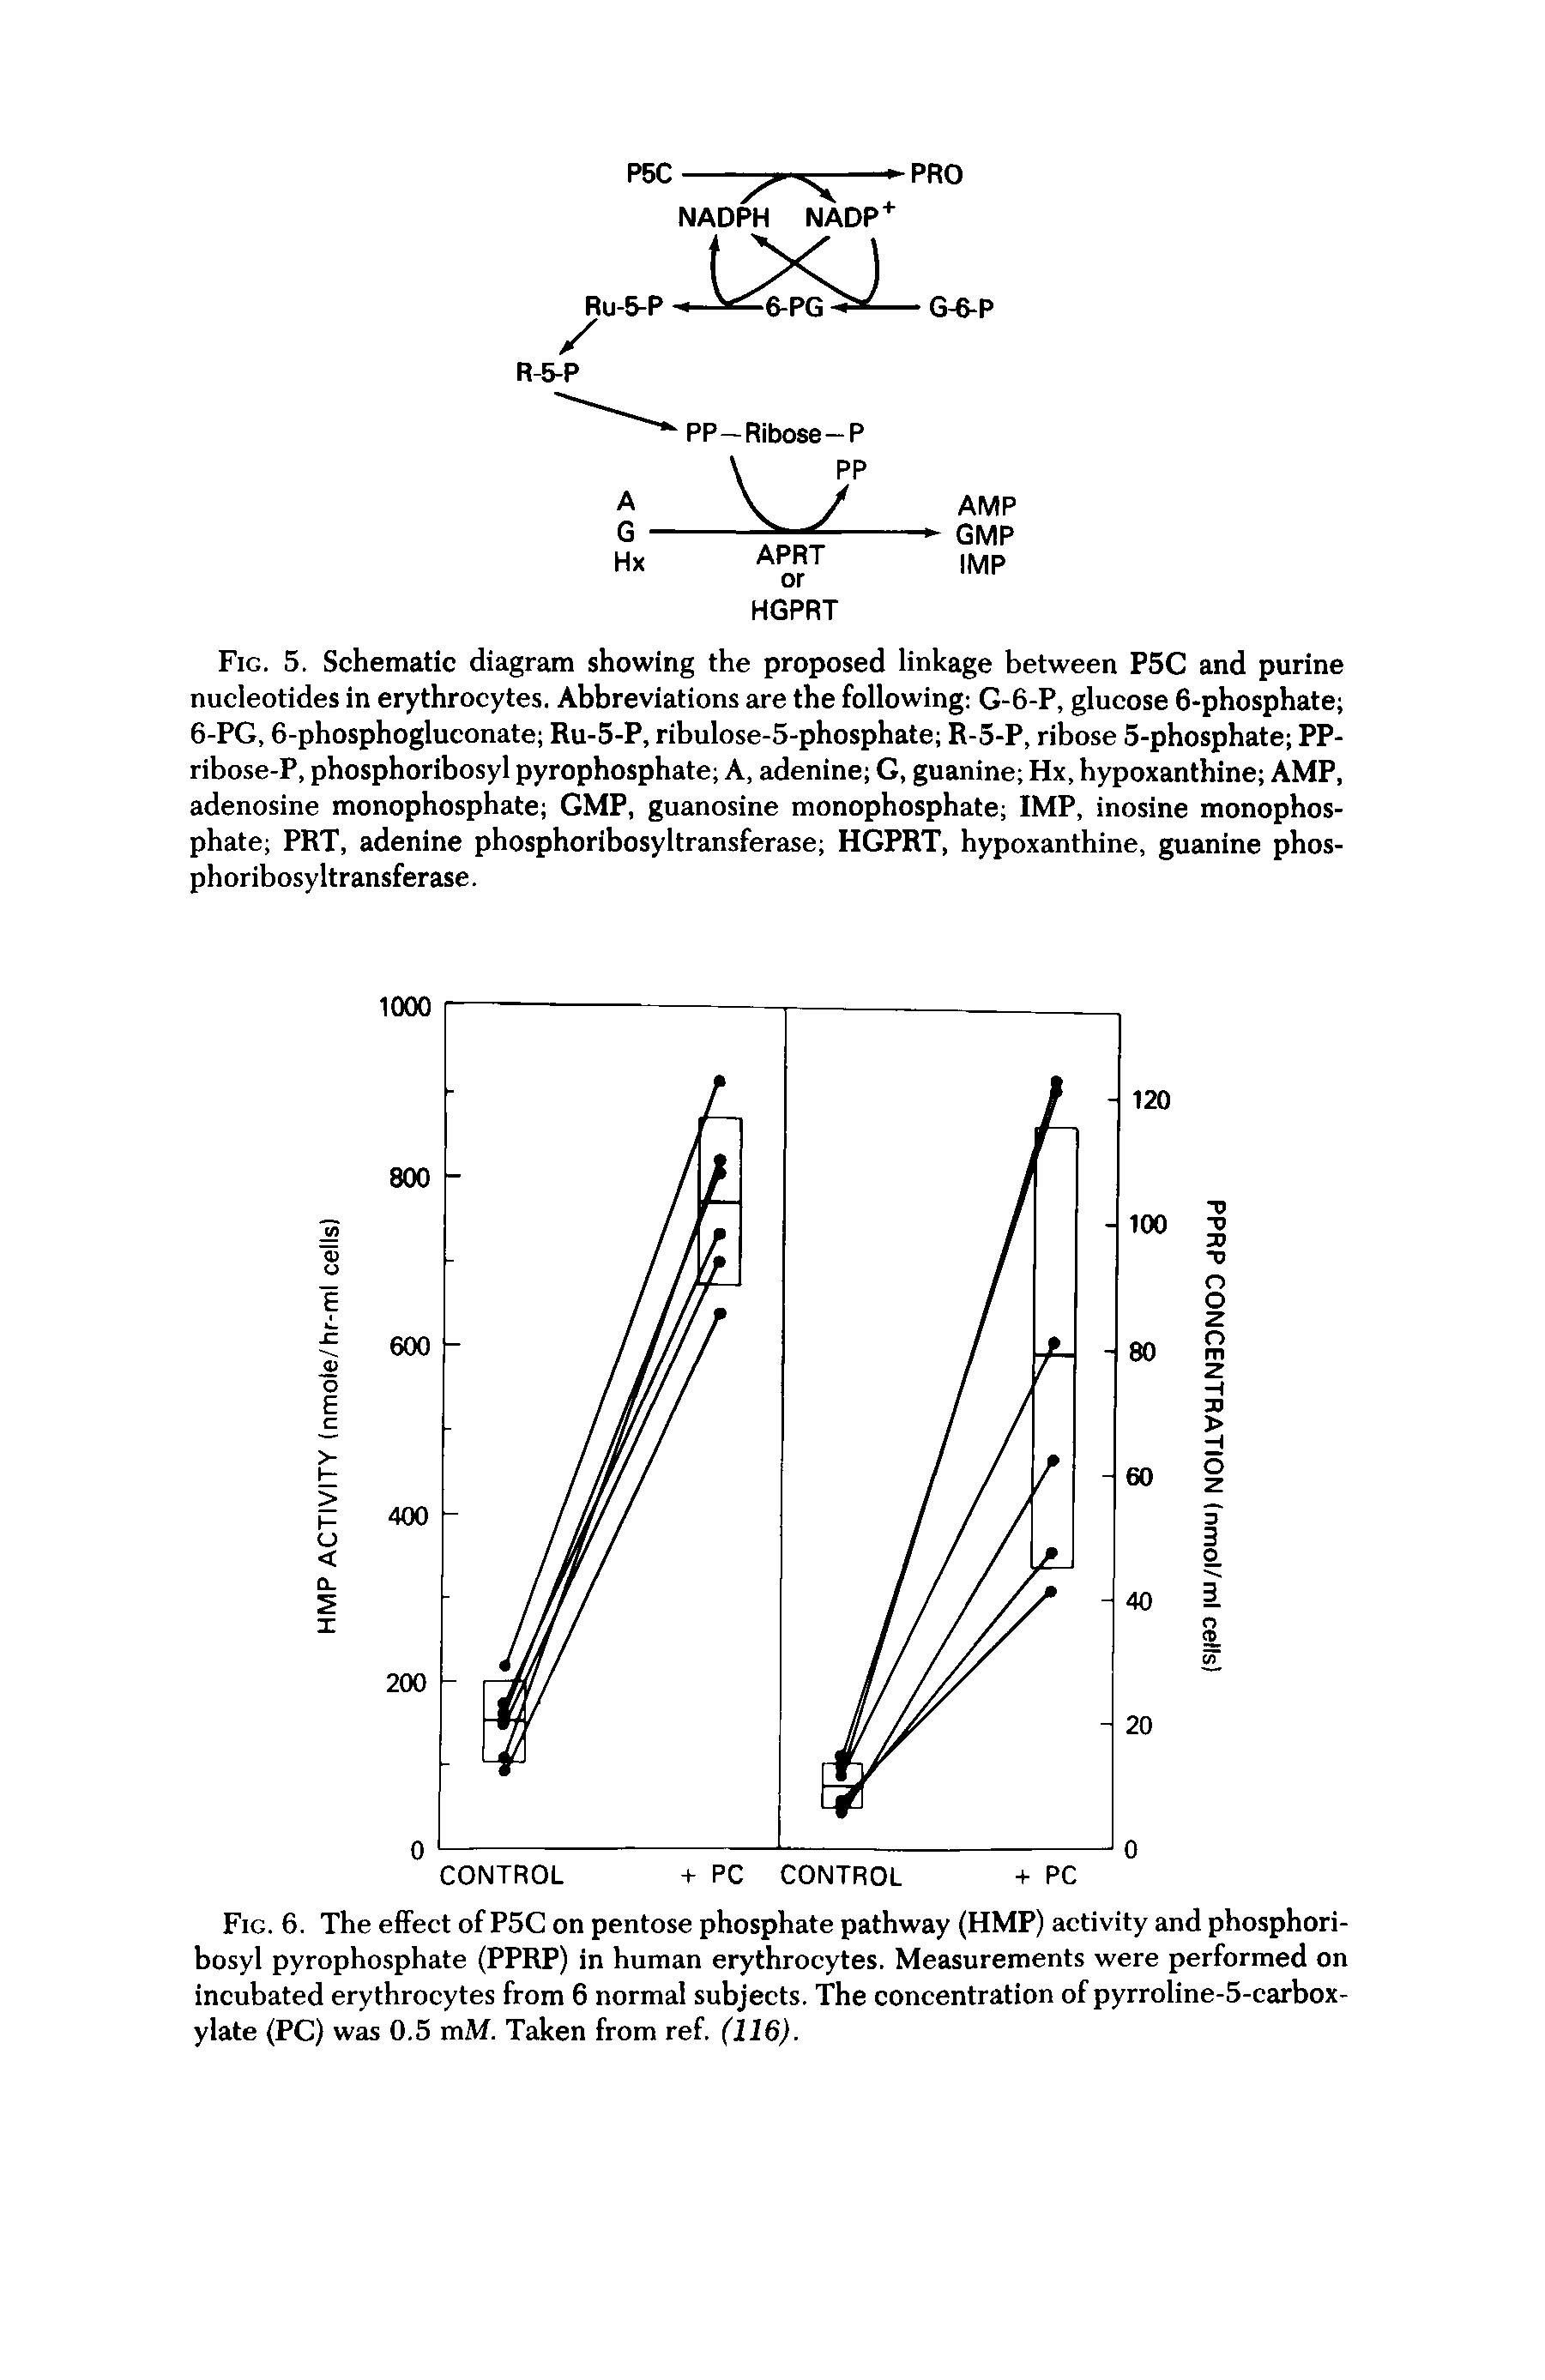 Fig. 5. Schematic diagram showing the proposed linkage between P5C and purine nucleotides in erythrocytes. Abbreviations are the following G-6-P, glucose 6-phosphate 6-PG, 6-phosphogluconate Ru-5-P, ribulose-5-phosphate R-5-P, ribose 5-phosphate PP-ribose-P, phosphoribosyl pyrophosphate A, adenine G, guanine Hx, hypoxanthine AMP, adenosine monophosphate GMP, guanosine monophosphate IMP, inosine monophosphate PRT, adenine phosphoribosyltransferase HGPRT, hypoxanthine, guanine phos-phoribosyltransferase.